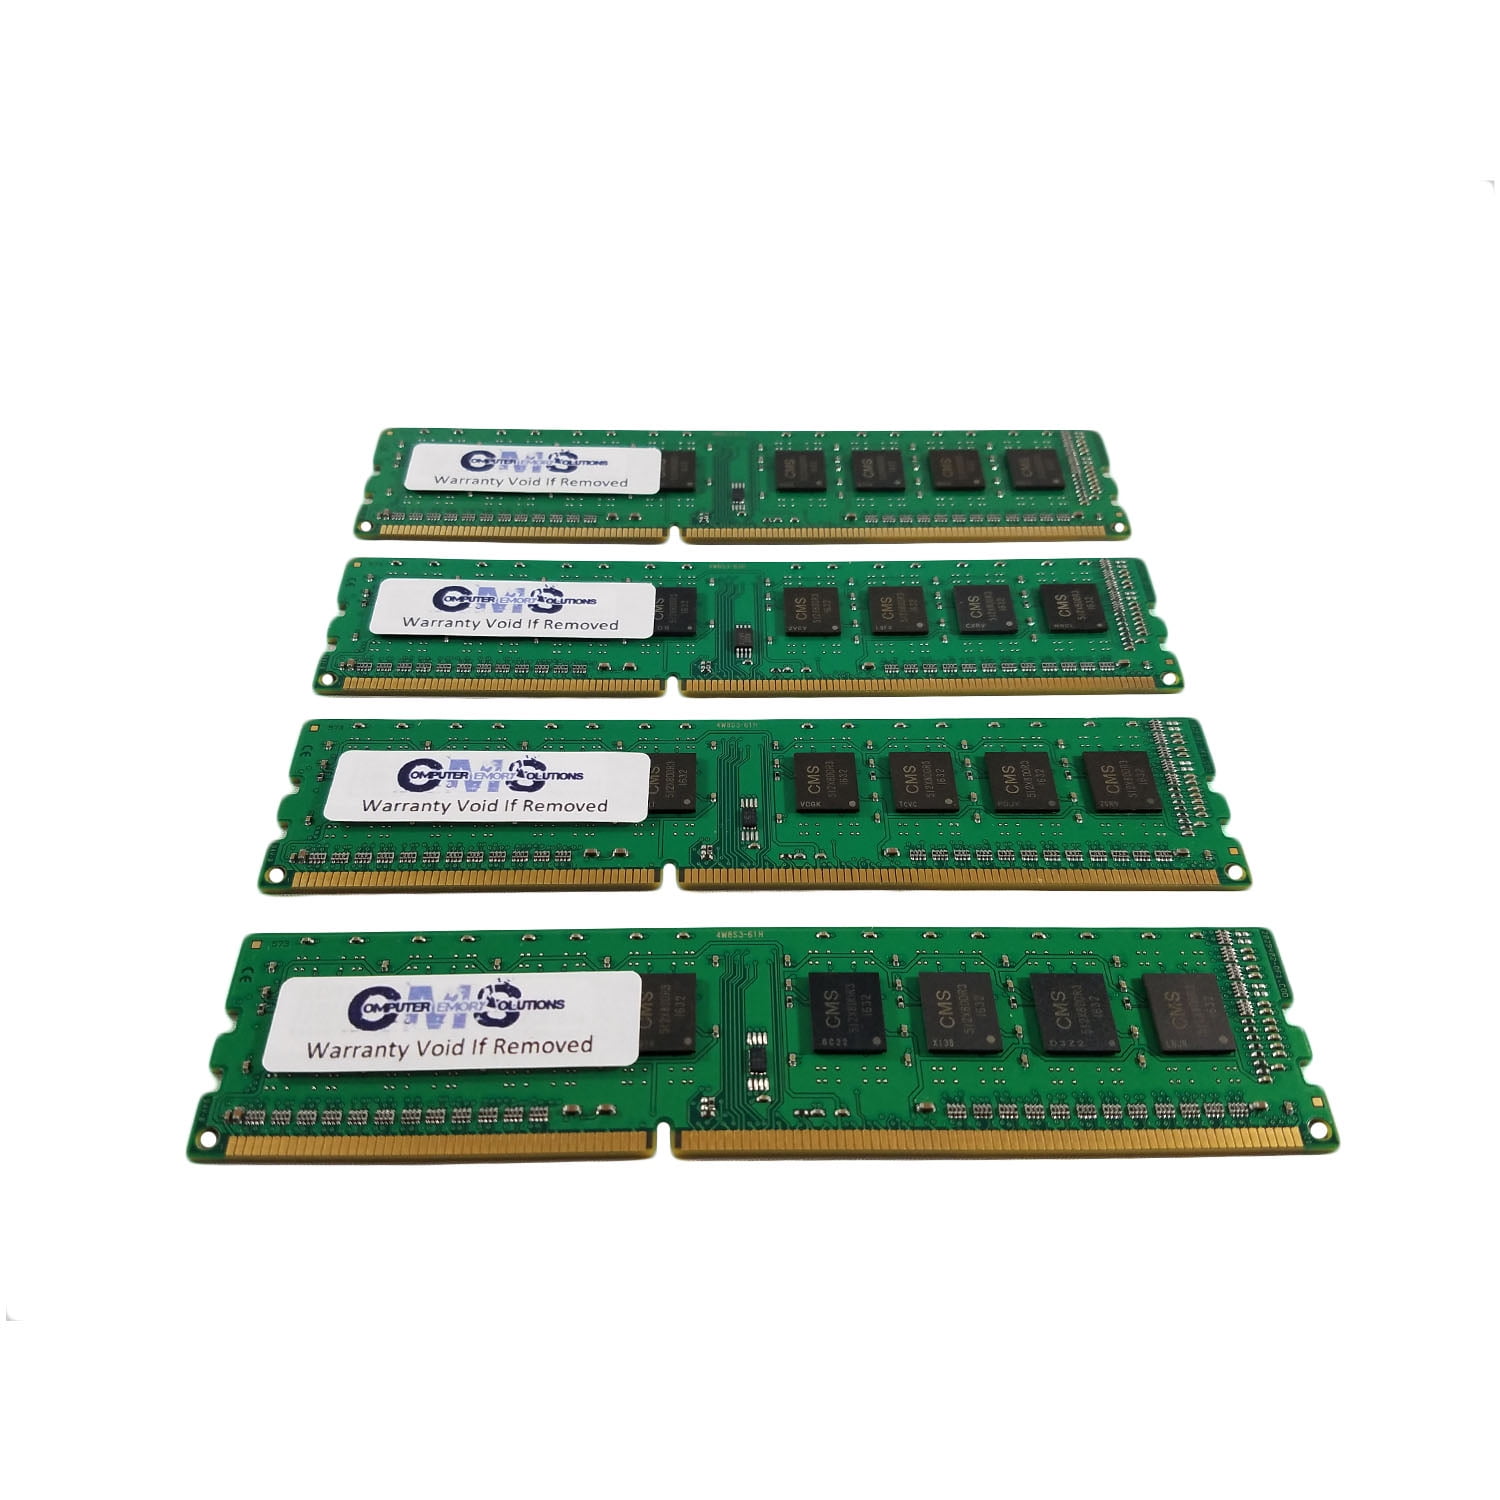 forkæle Muldyr inflation CMS 32GB (4X8GB) DDR3 12800 1600MHz NON ECC DIMM Memory Ram Upgrade  Compatible with Dell® Optiplex 9010 Mt/Dt/Sff/Usff - C7 - Walmart.com